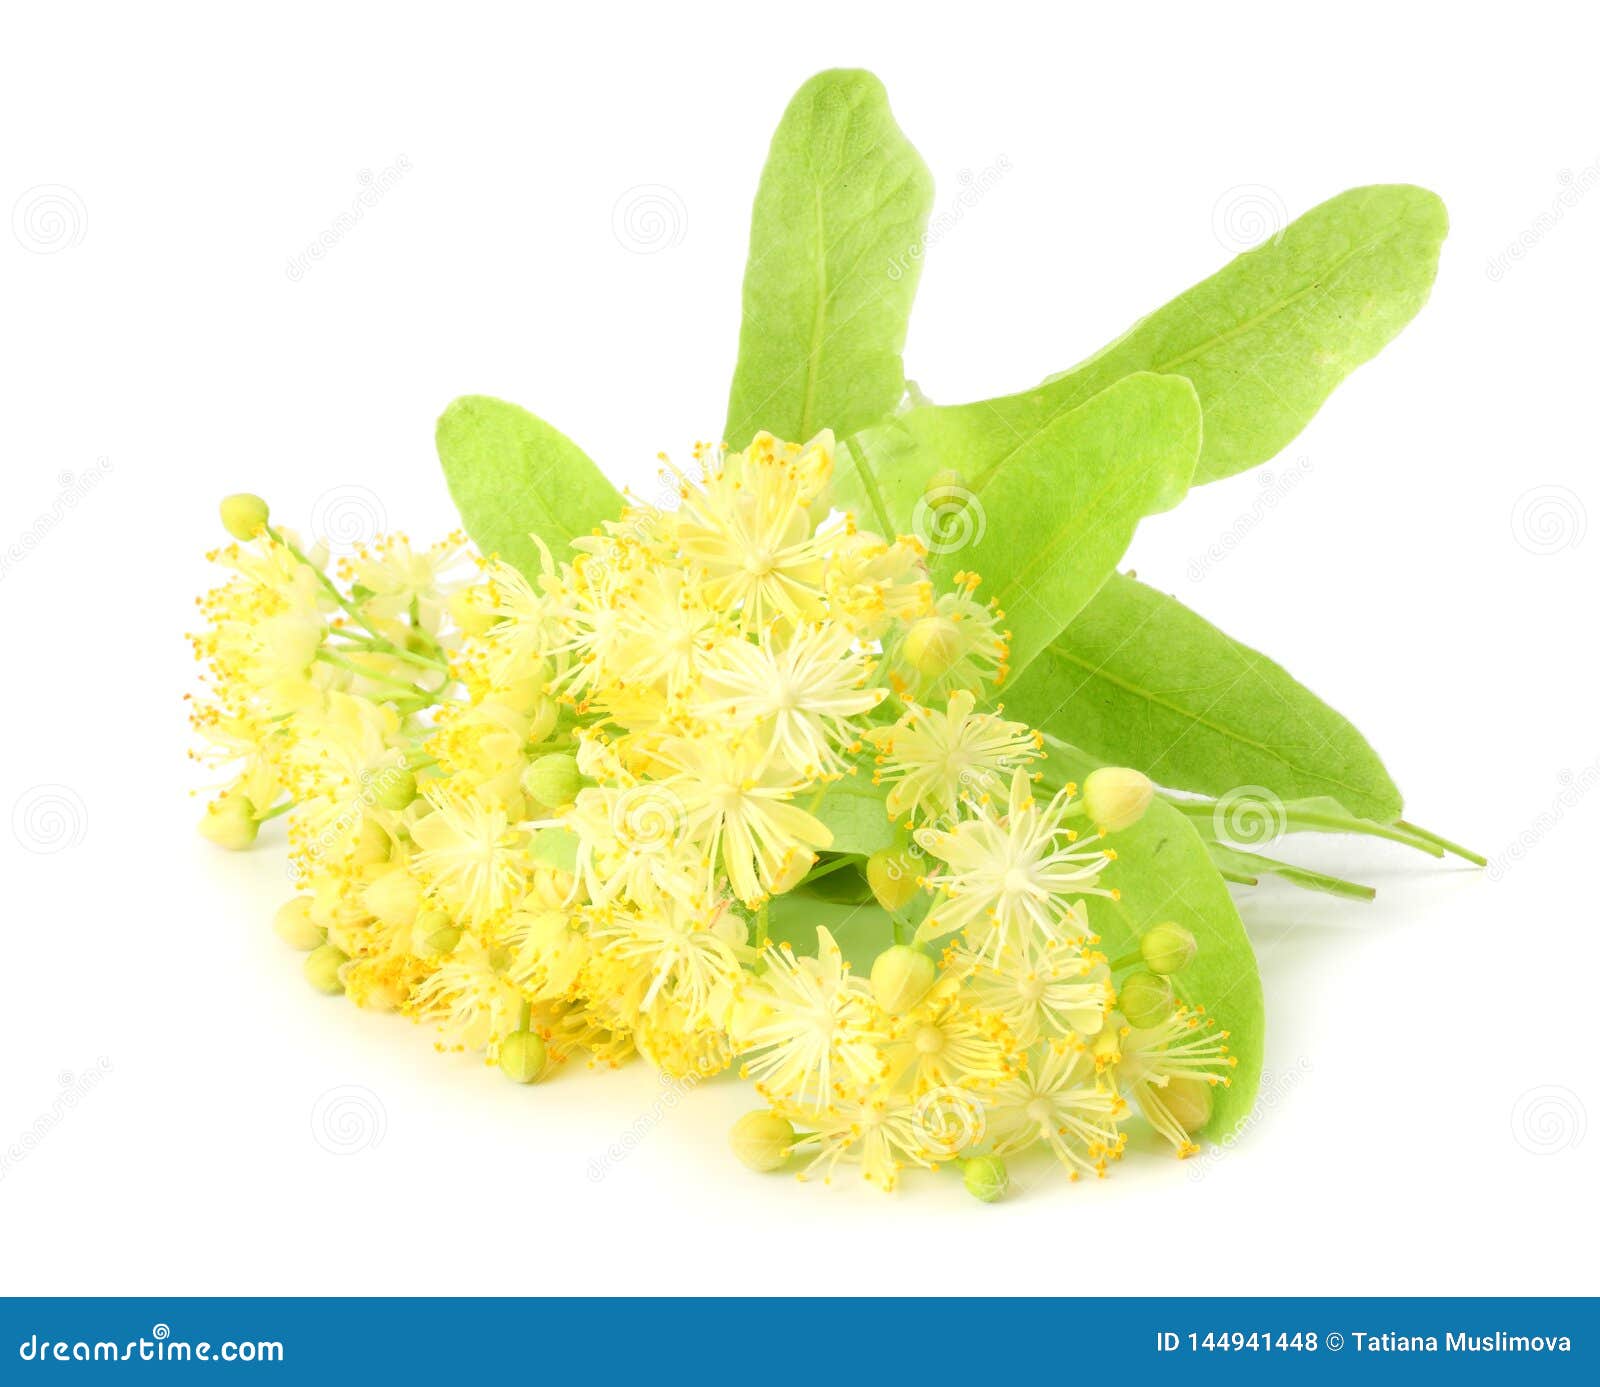 Linden Flowers Isolated on a White Background Stock Photo - Image of ...